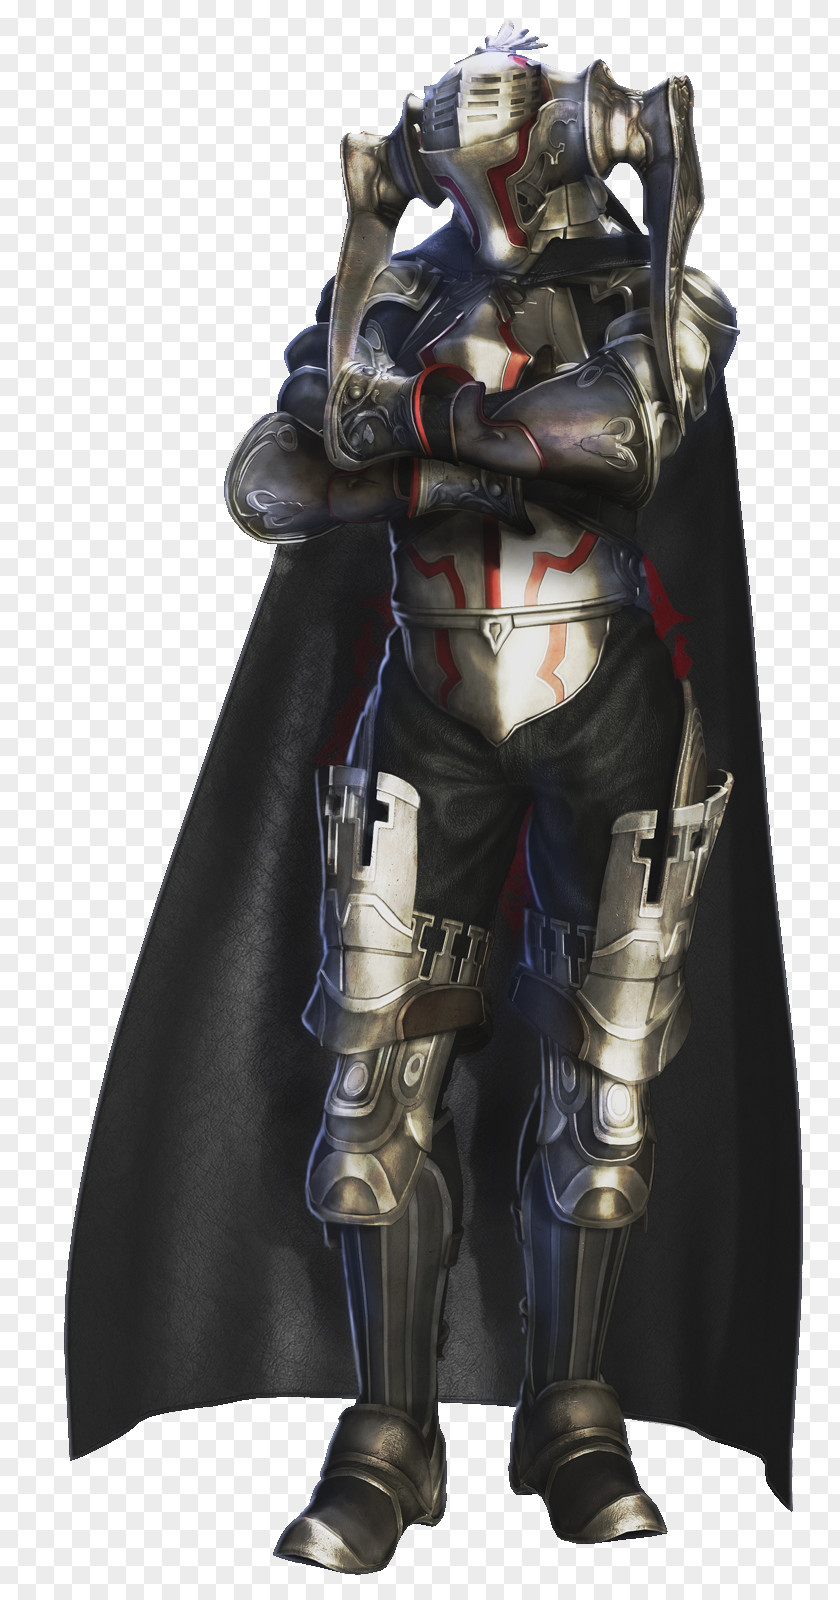 JUDGE Dead Space 2 Final Fantasy XII 3 PNG